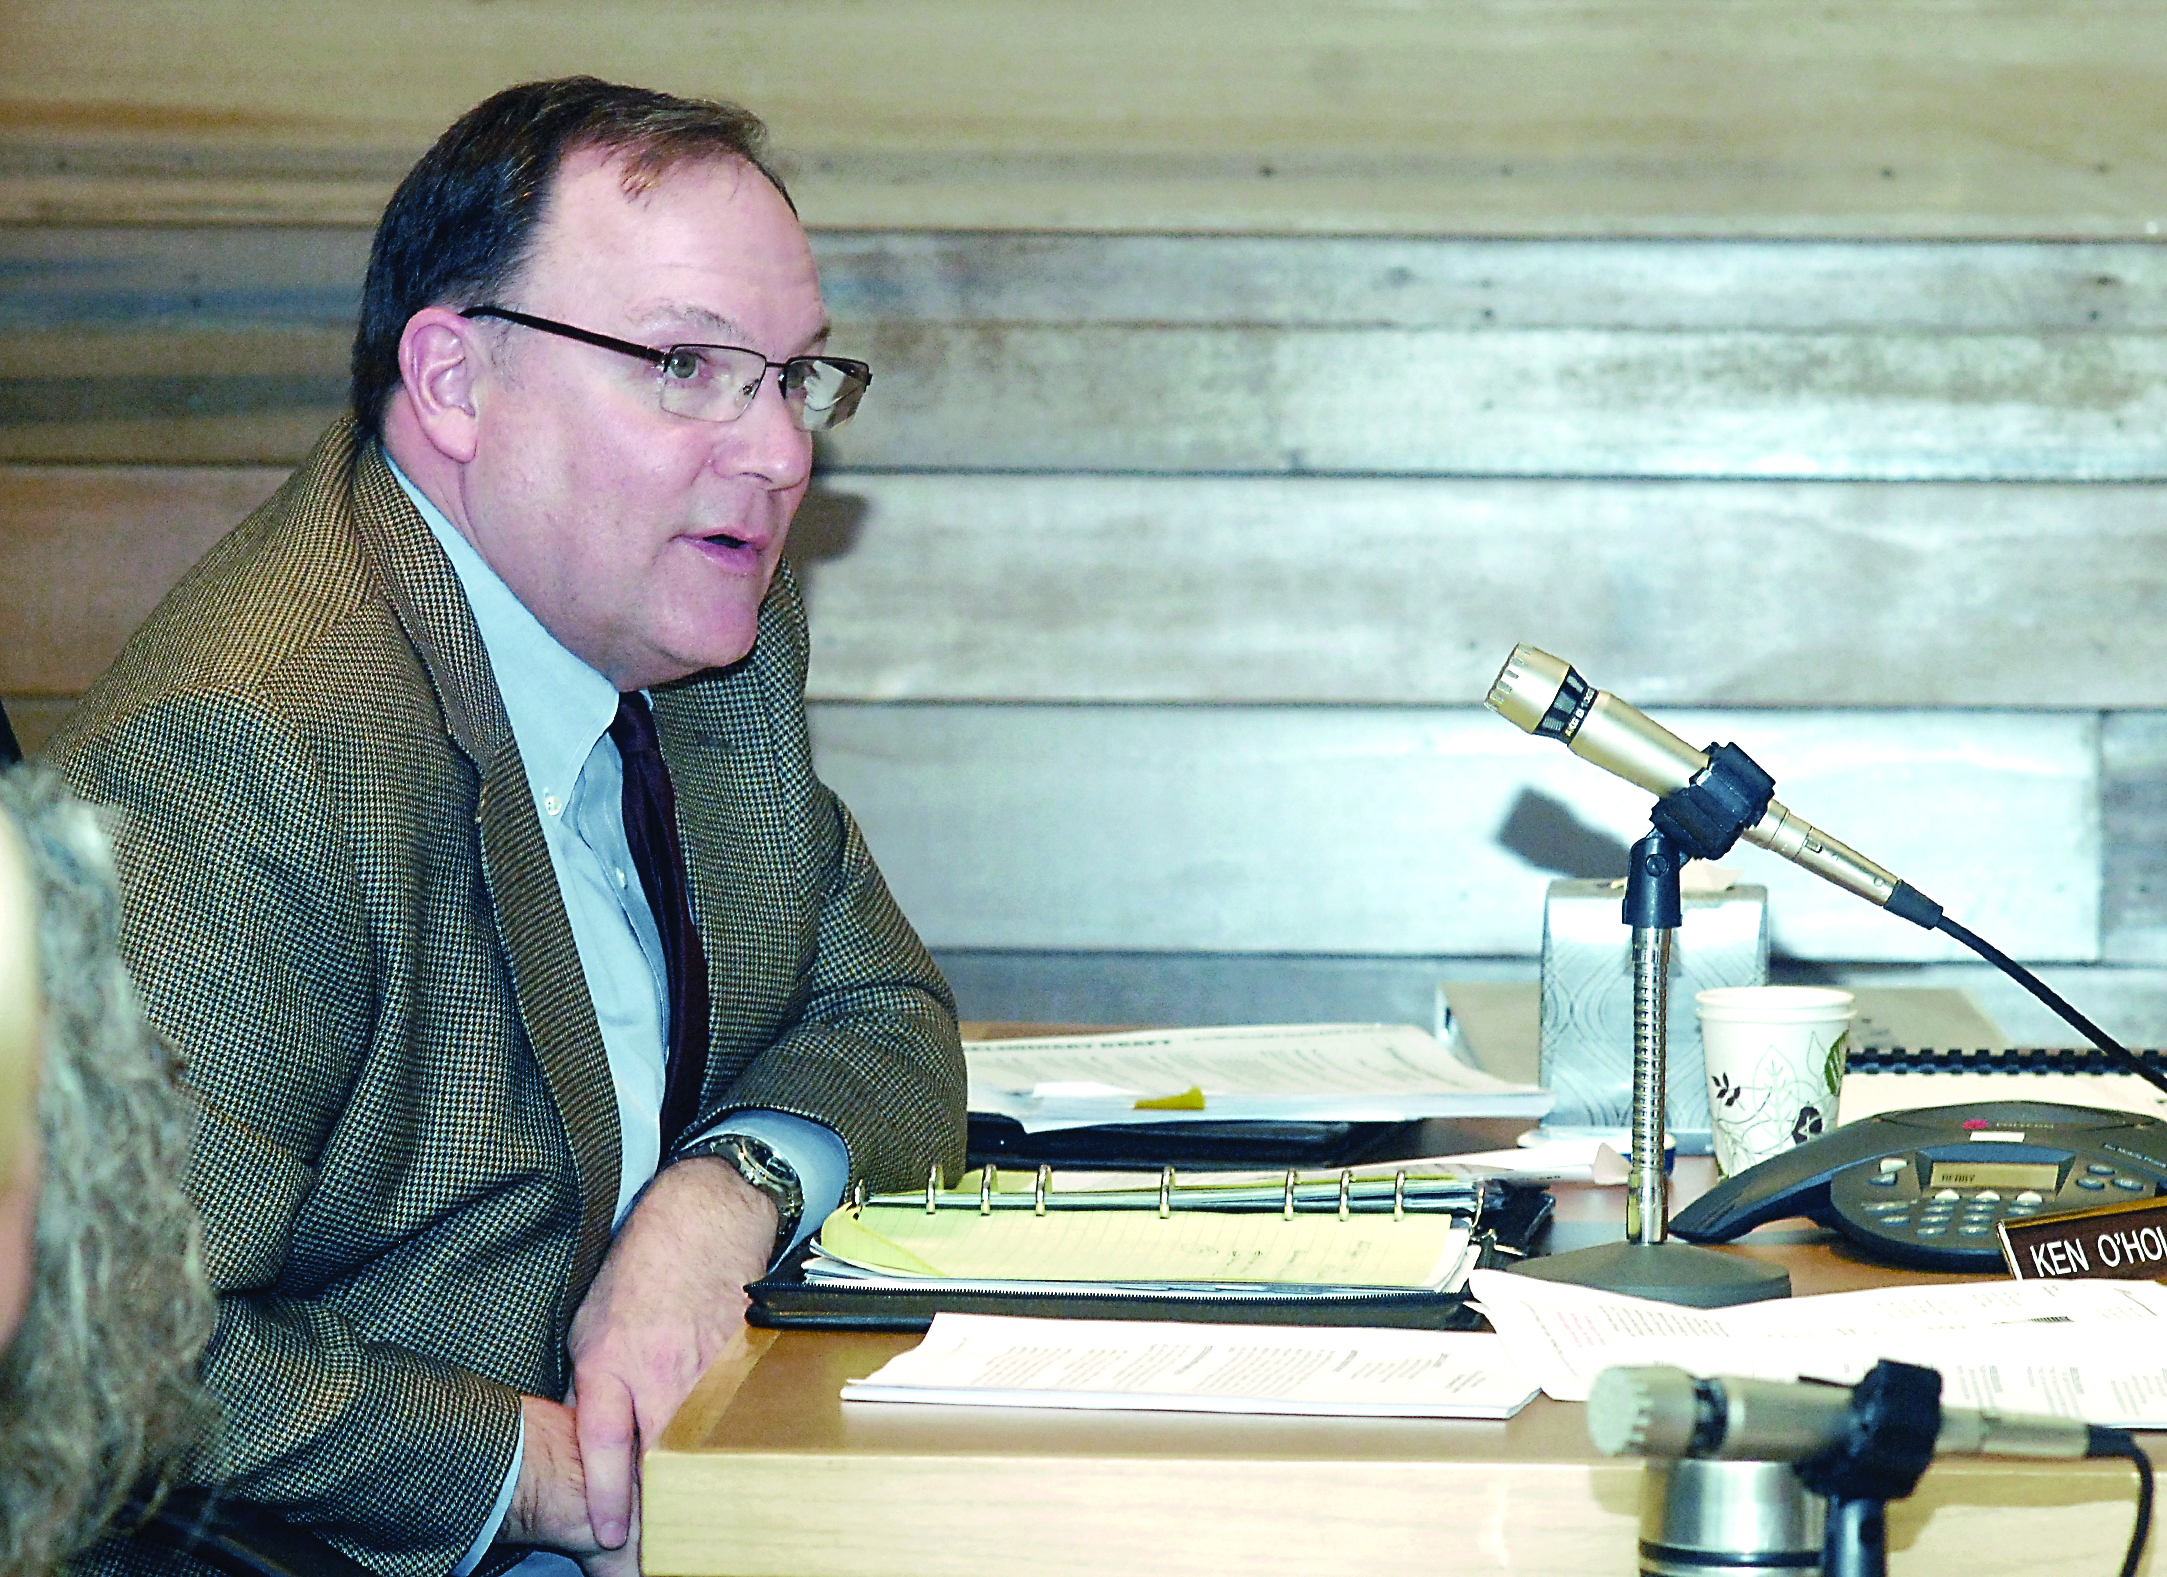 Interim executive director of the Port of Port Angeles Ken O’Hollaren speaks during a meeting of the port commissioners Tuesday. —Photo by Keith Thorpe/Peninsula Daily News